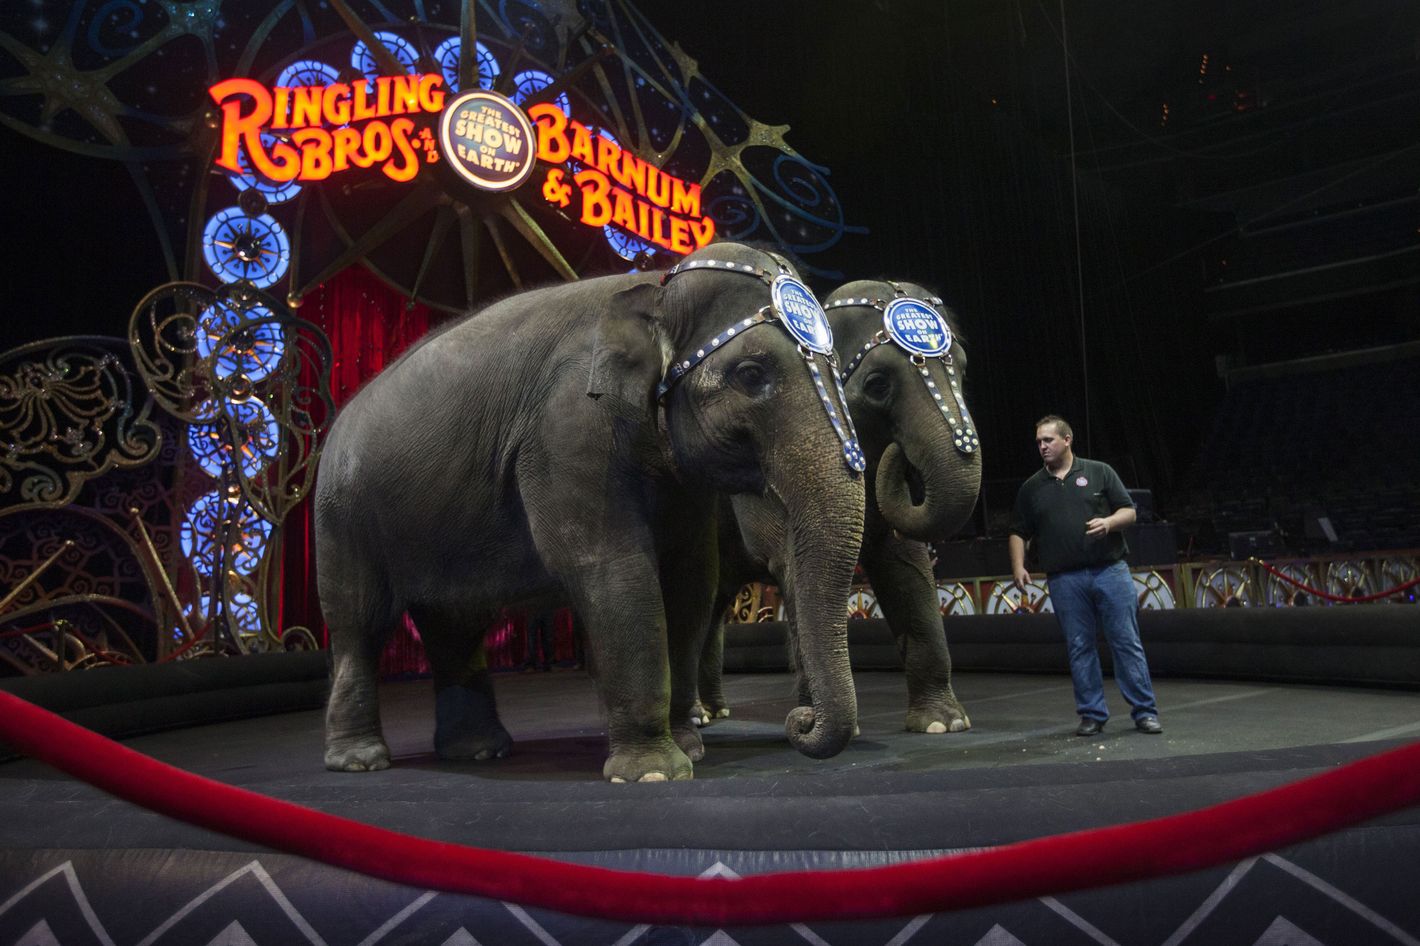 The Ringling Bros. Elephants Are Retiring Ahead of Schedule